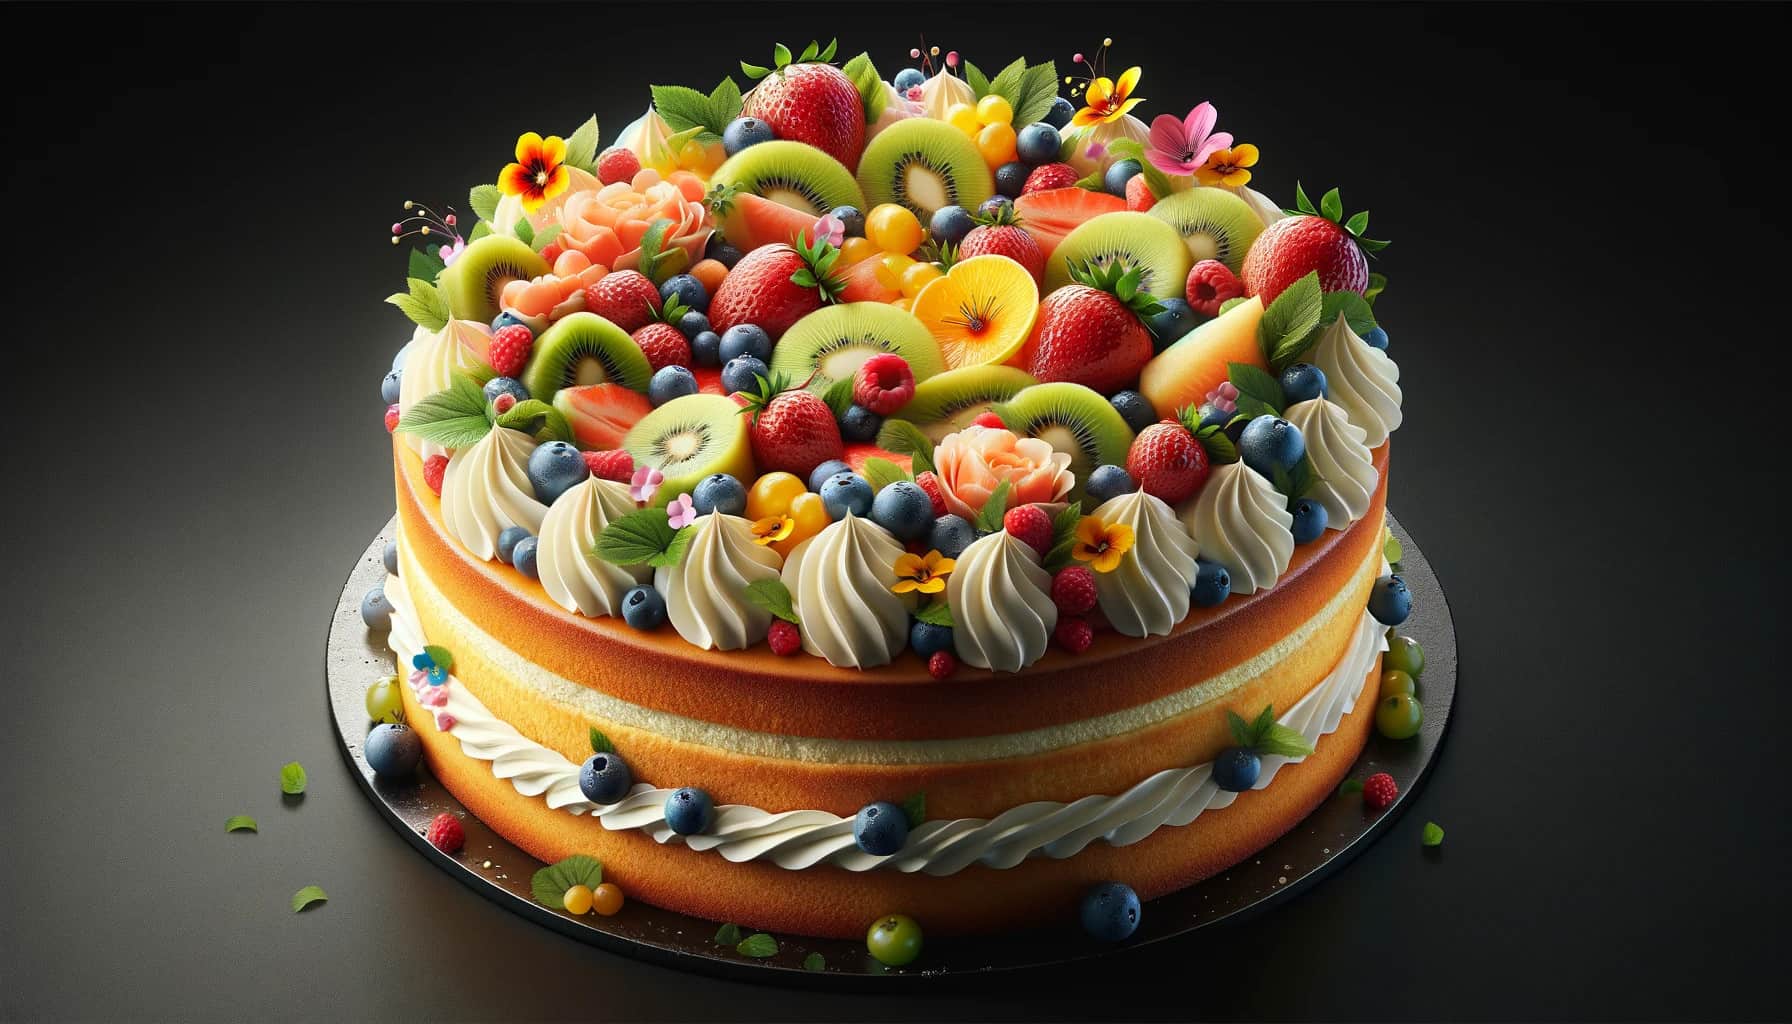 Sponge cake topped with fresh fruit and whipped cream, and decorated with edible flowers.